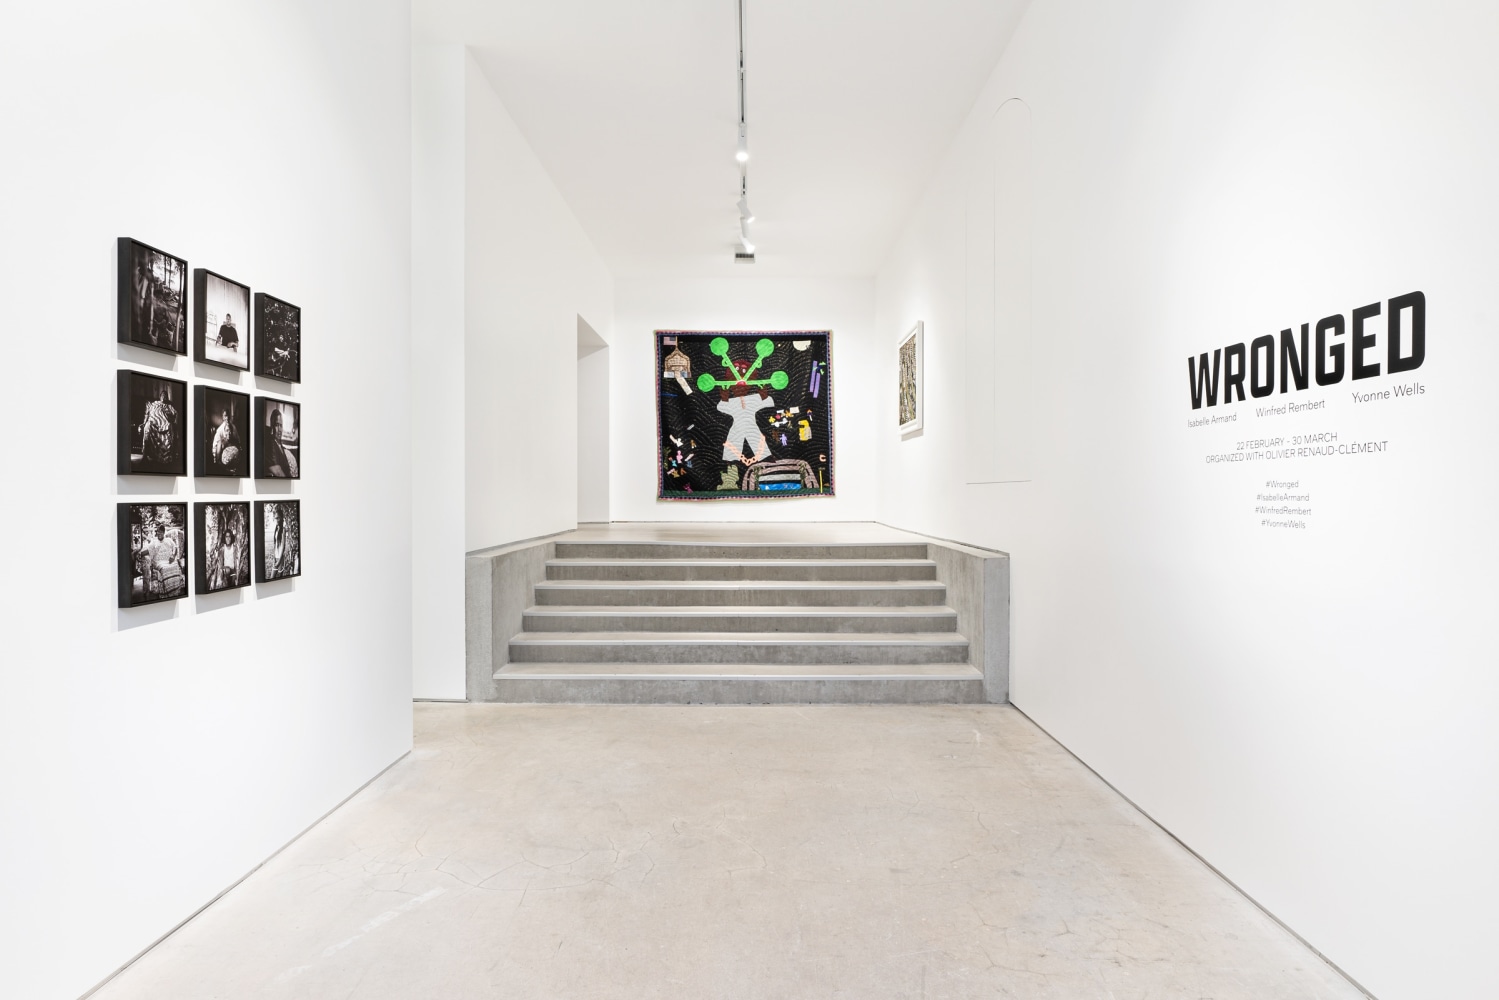 Pictured: Exhibition installation views. Photo: Mike Derez. &amp;copy; The Artists. Courtesy of the artists, Galerie Marguo and&amp;nbsp;Fort Gansevoort.